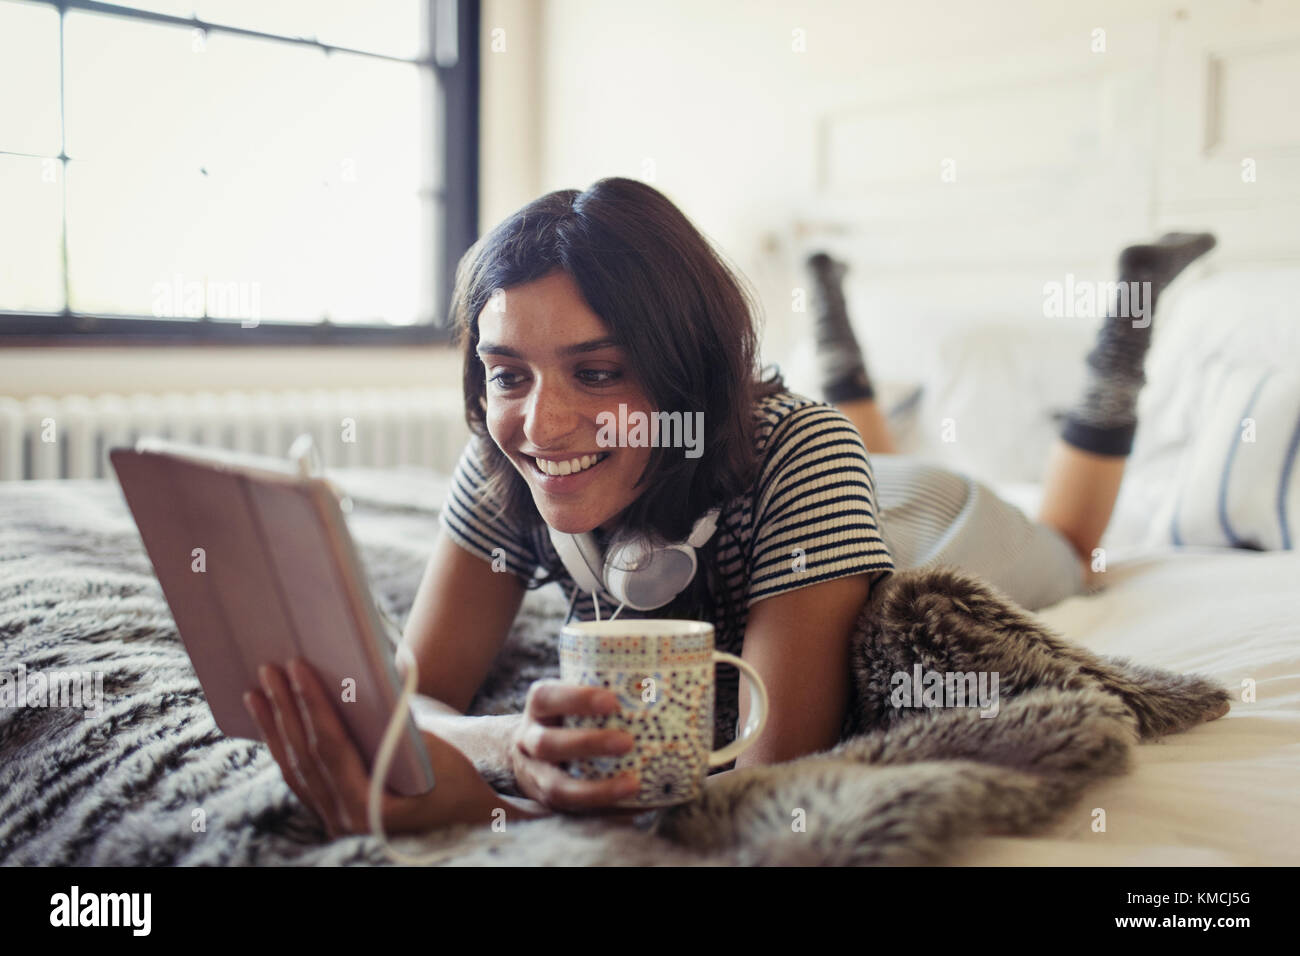 Smiling young woman drinking coffee and using digital tablet on bed Stock Photo